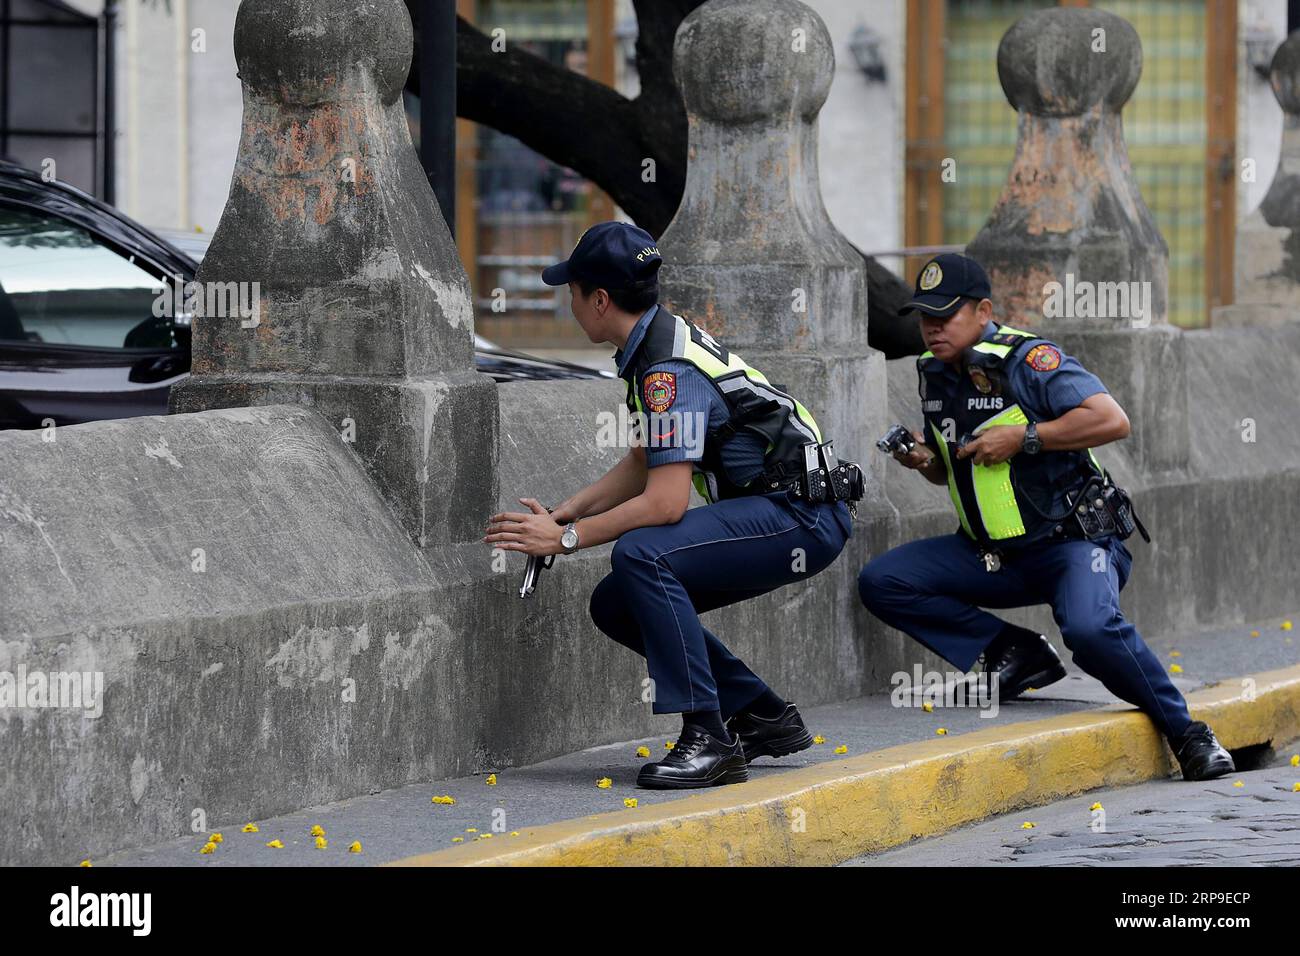 (190404) -- MANILA, April 4, 2019 -- Members of the Philippine National Police (PNP) participate in an anti-terrorism drill in Manila, the Philippines, April 4, 2019. Philippine security forces have tightened security after Wednesday s blast in southern Philippine Isulan town in Sultan Kudarat province that wounded 18 people at least, a military general said on Thursday. ) PHILIPPINES-MANILA-ANTI-TERRORISM DRILL ROUELLExUMALI PUBLICATIONxNOTxINxCHN Stock Photo